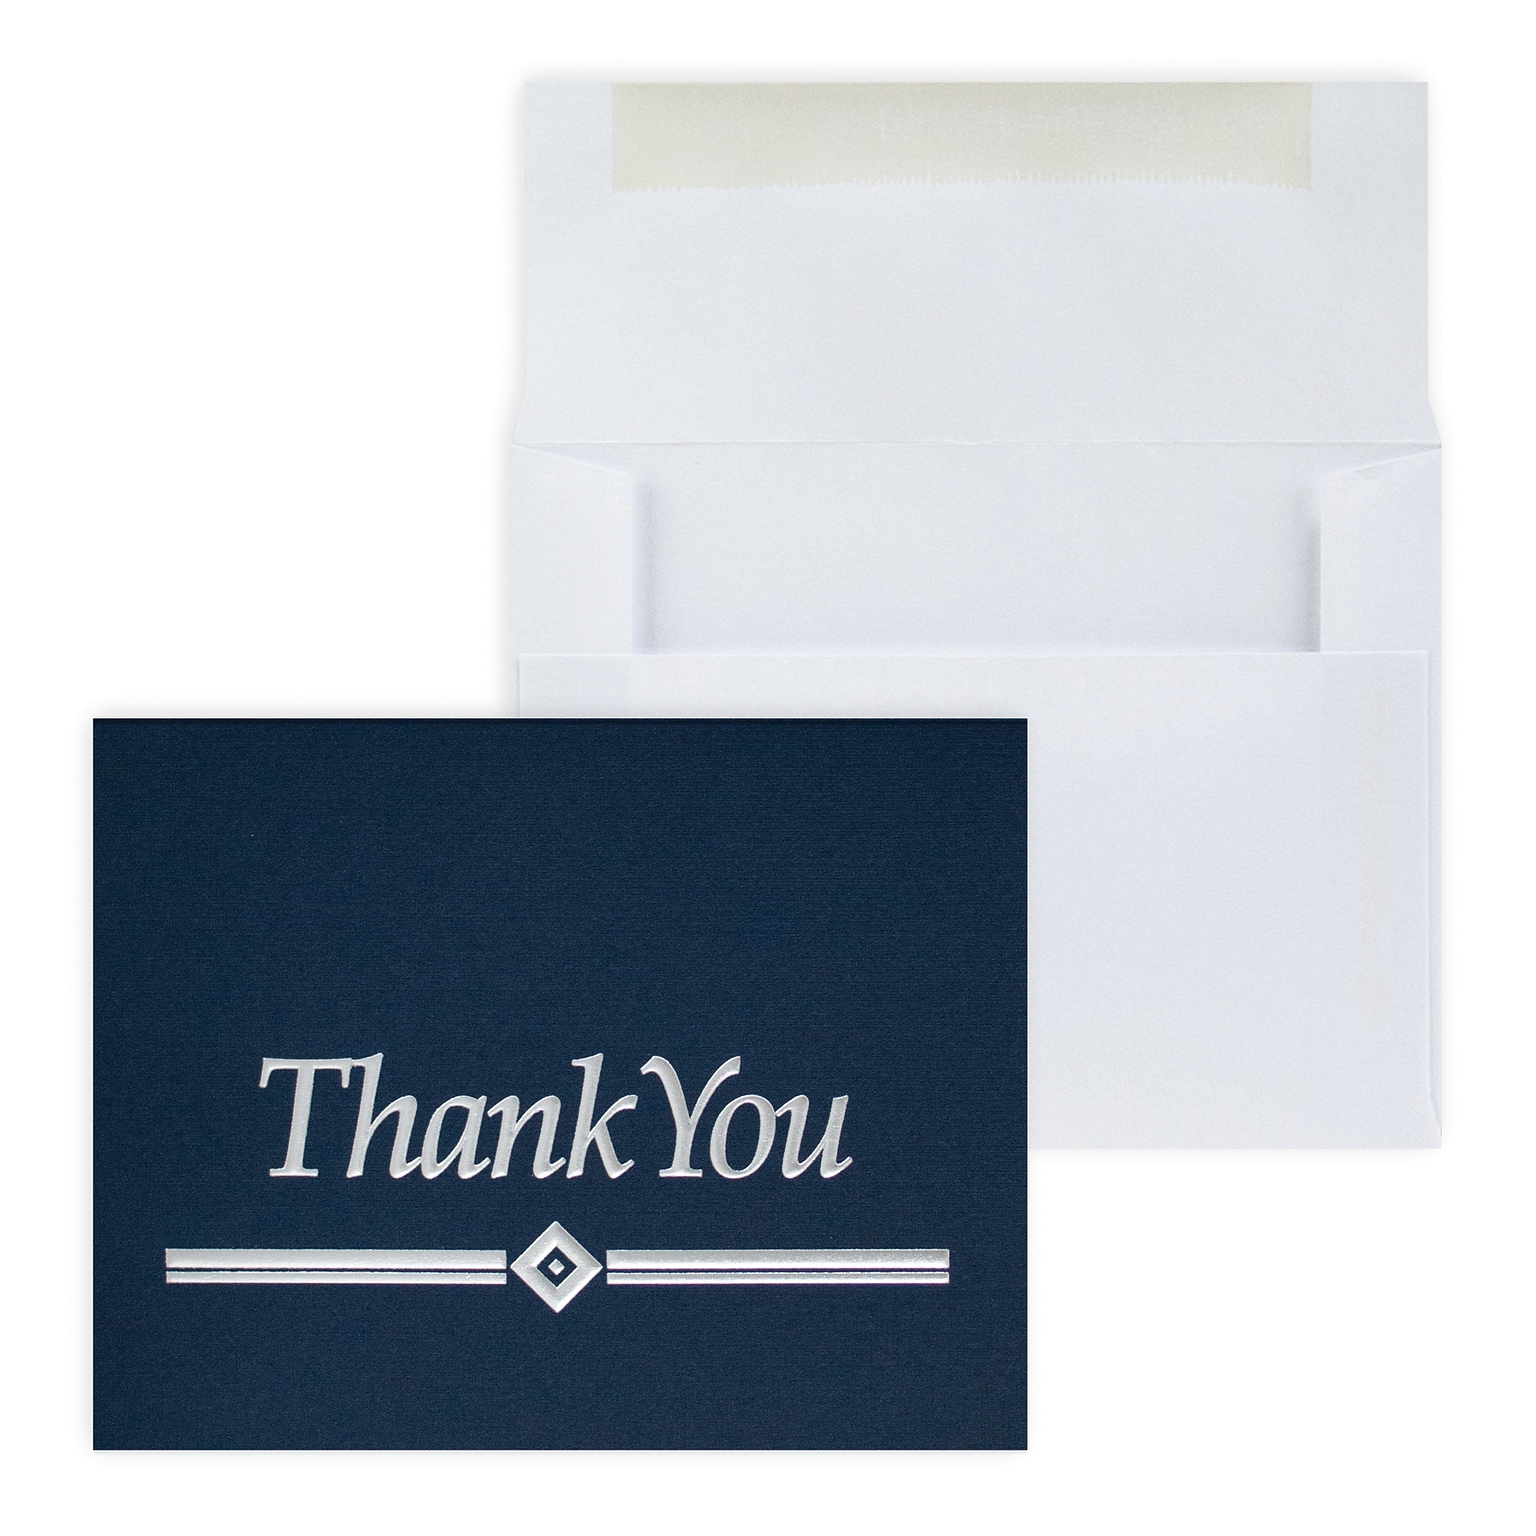 Custom Thank You Greeting Cards with Foil, With Envelopes, 4-1/4 x 5-3/8, 25 Cards per Set